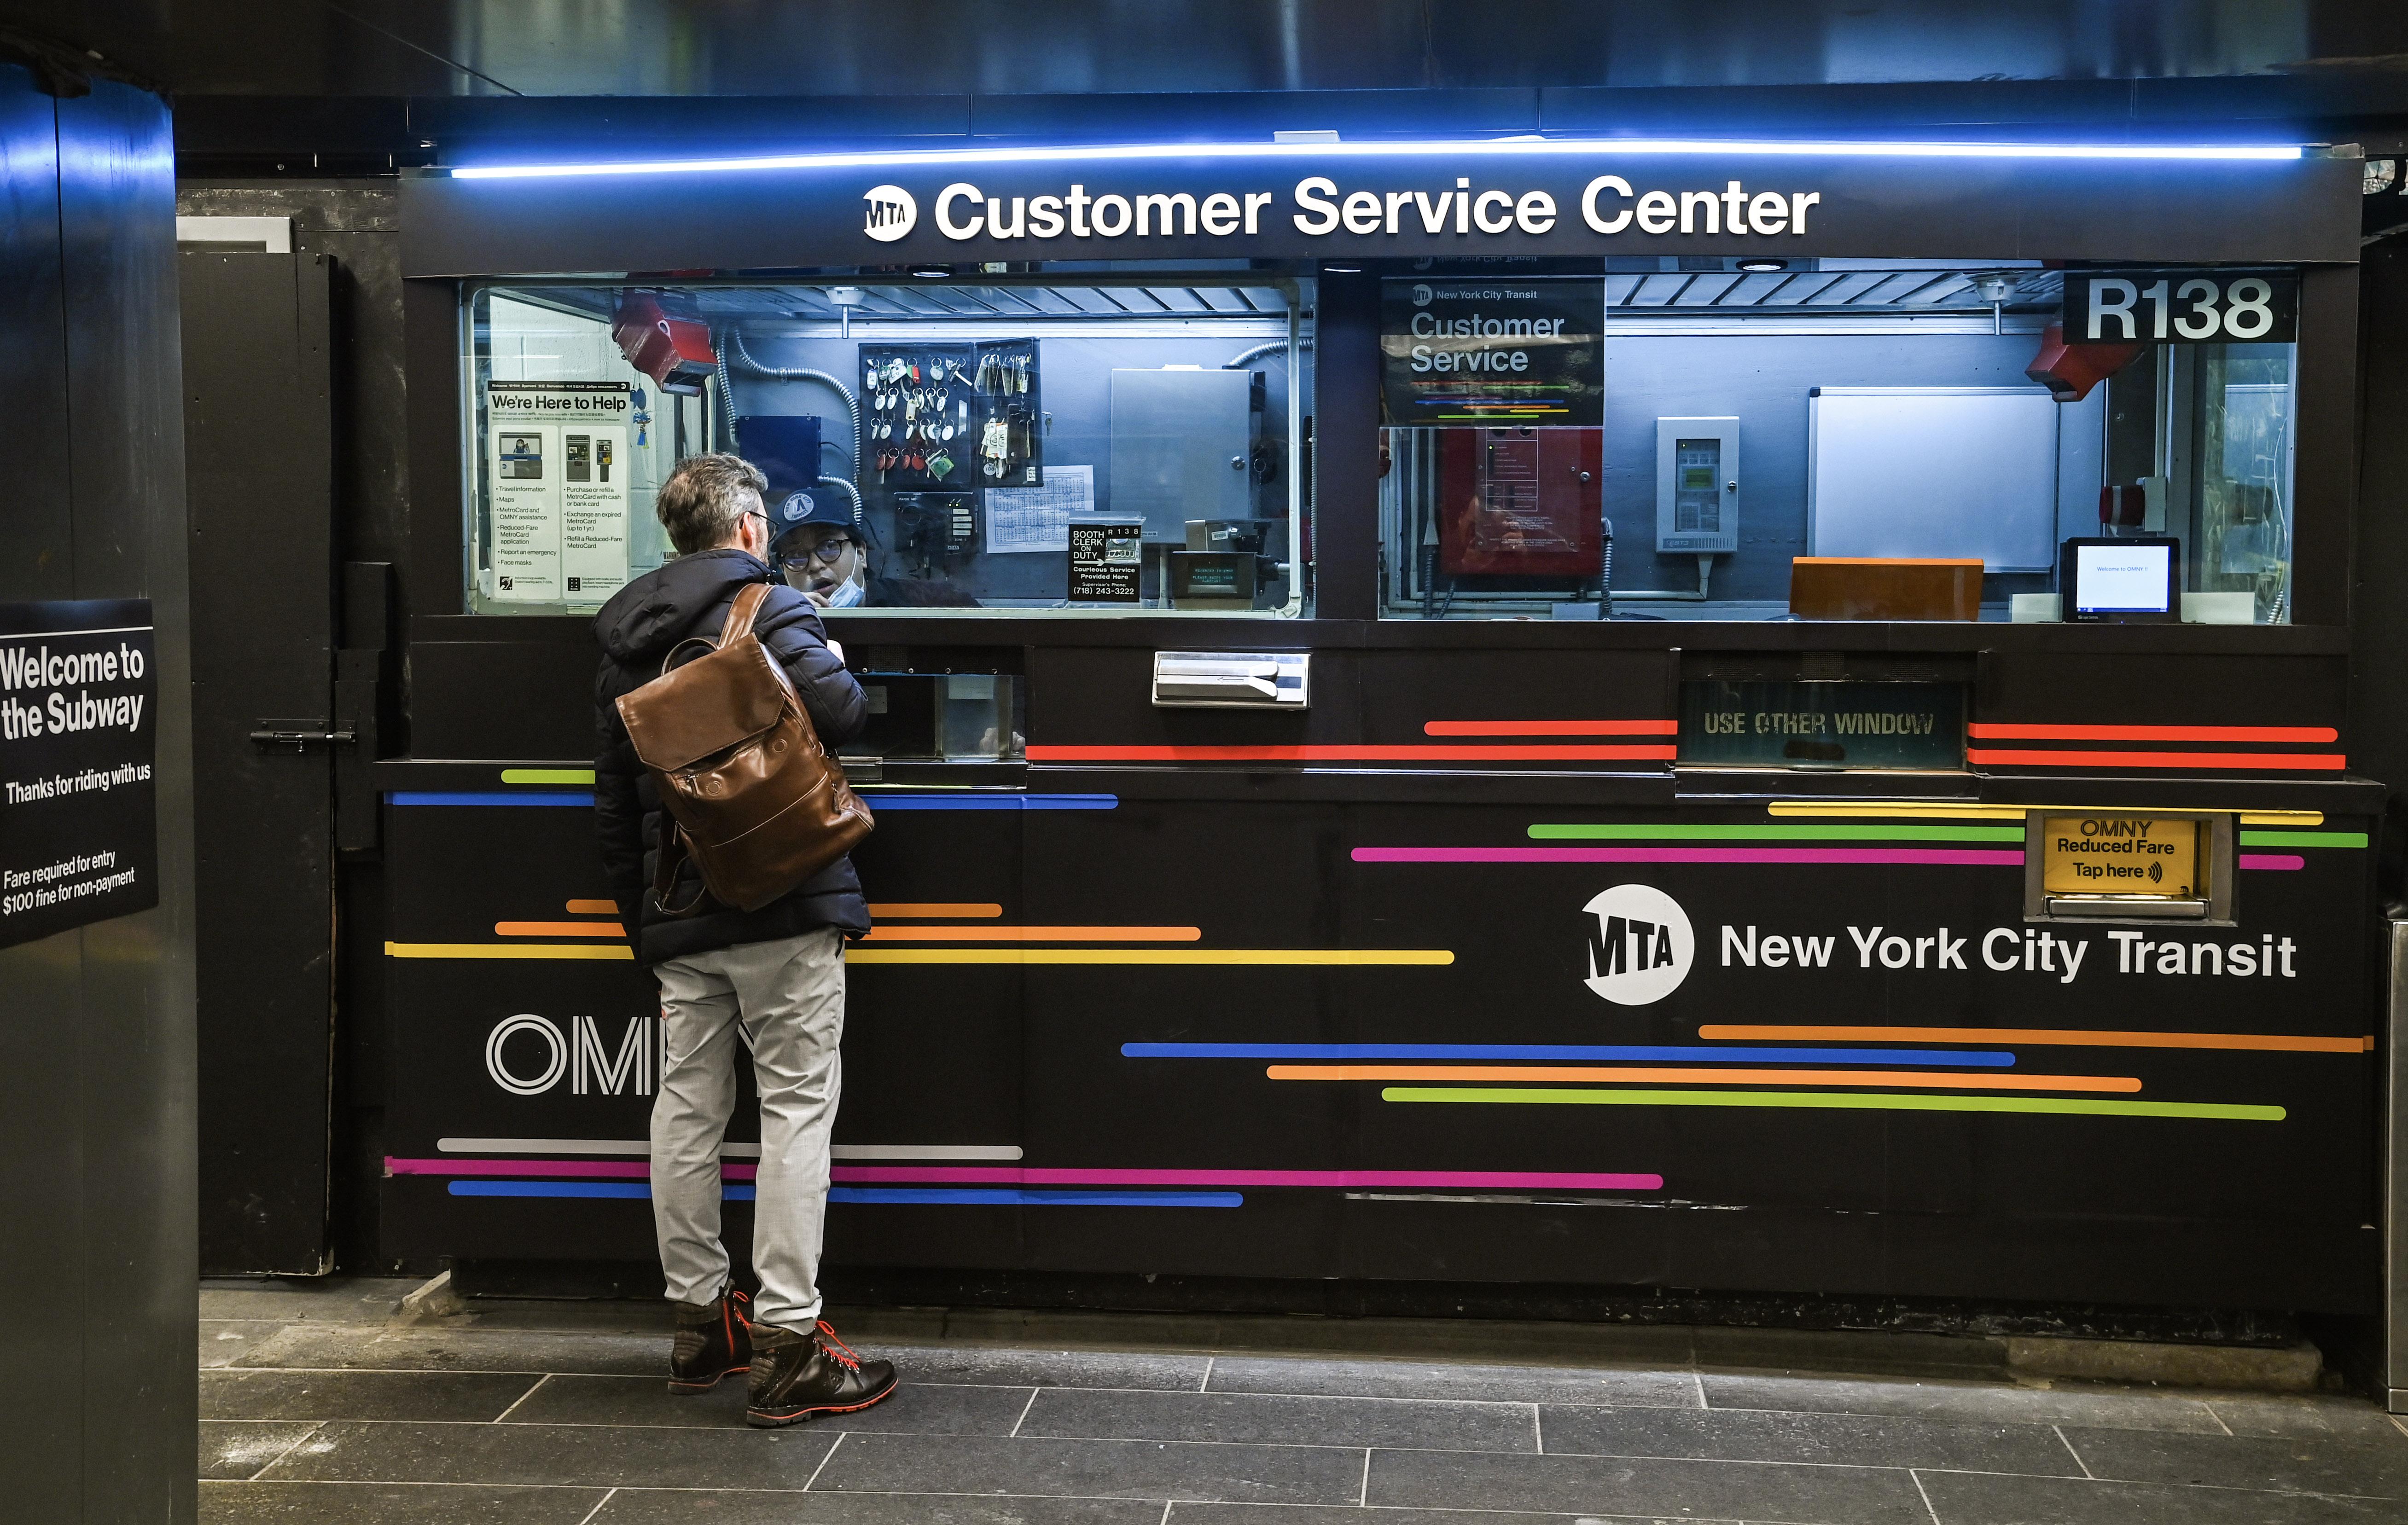 MTA Announces the Opening of Three New Customer Service Centers in the New York City Subway